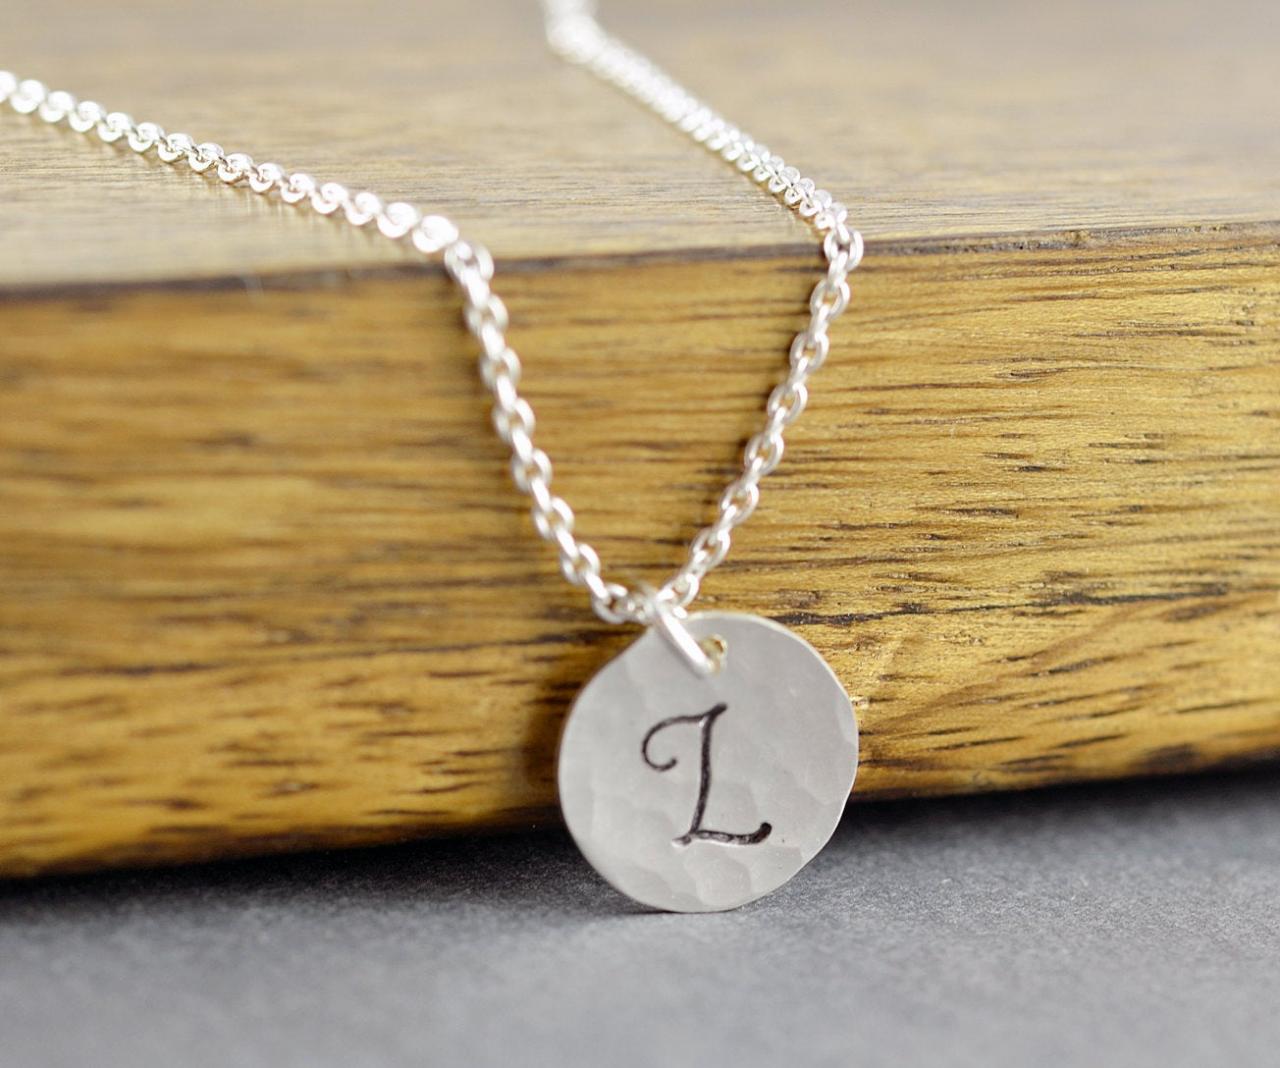 Sterling Silver Initial Necklace - Initial Jewelry - Initial Necklace - Hand Stamped Initial - Delicate Necklace - Layering Jewelry